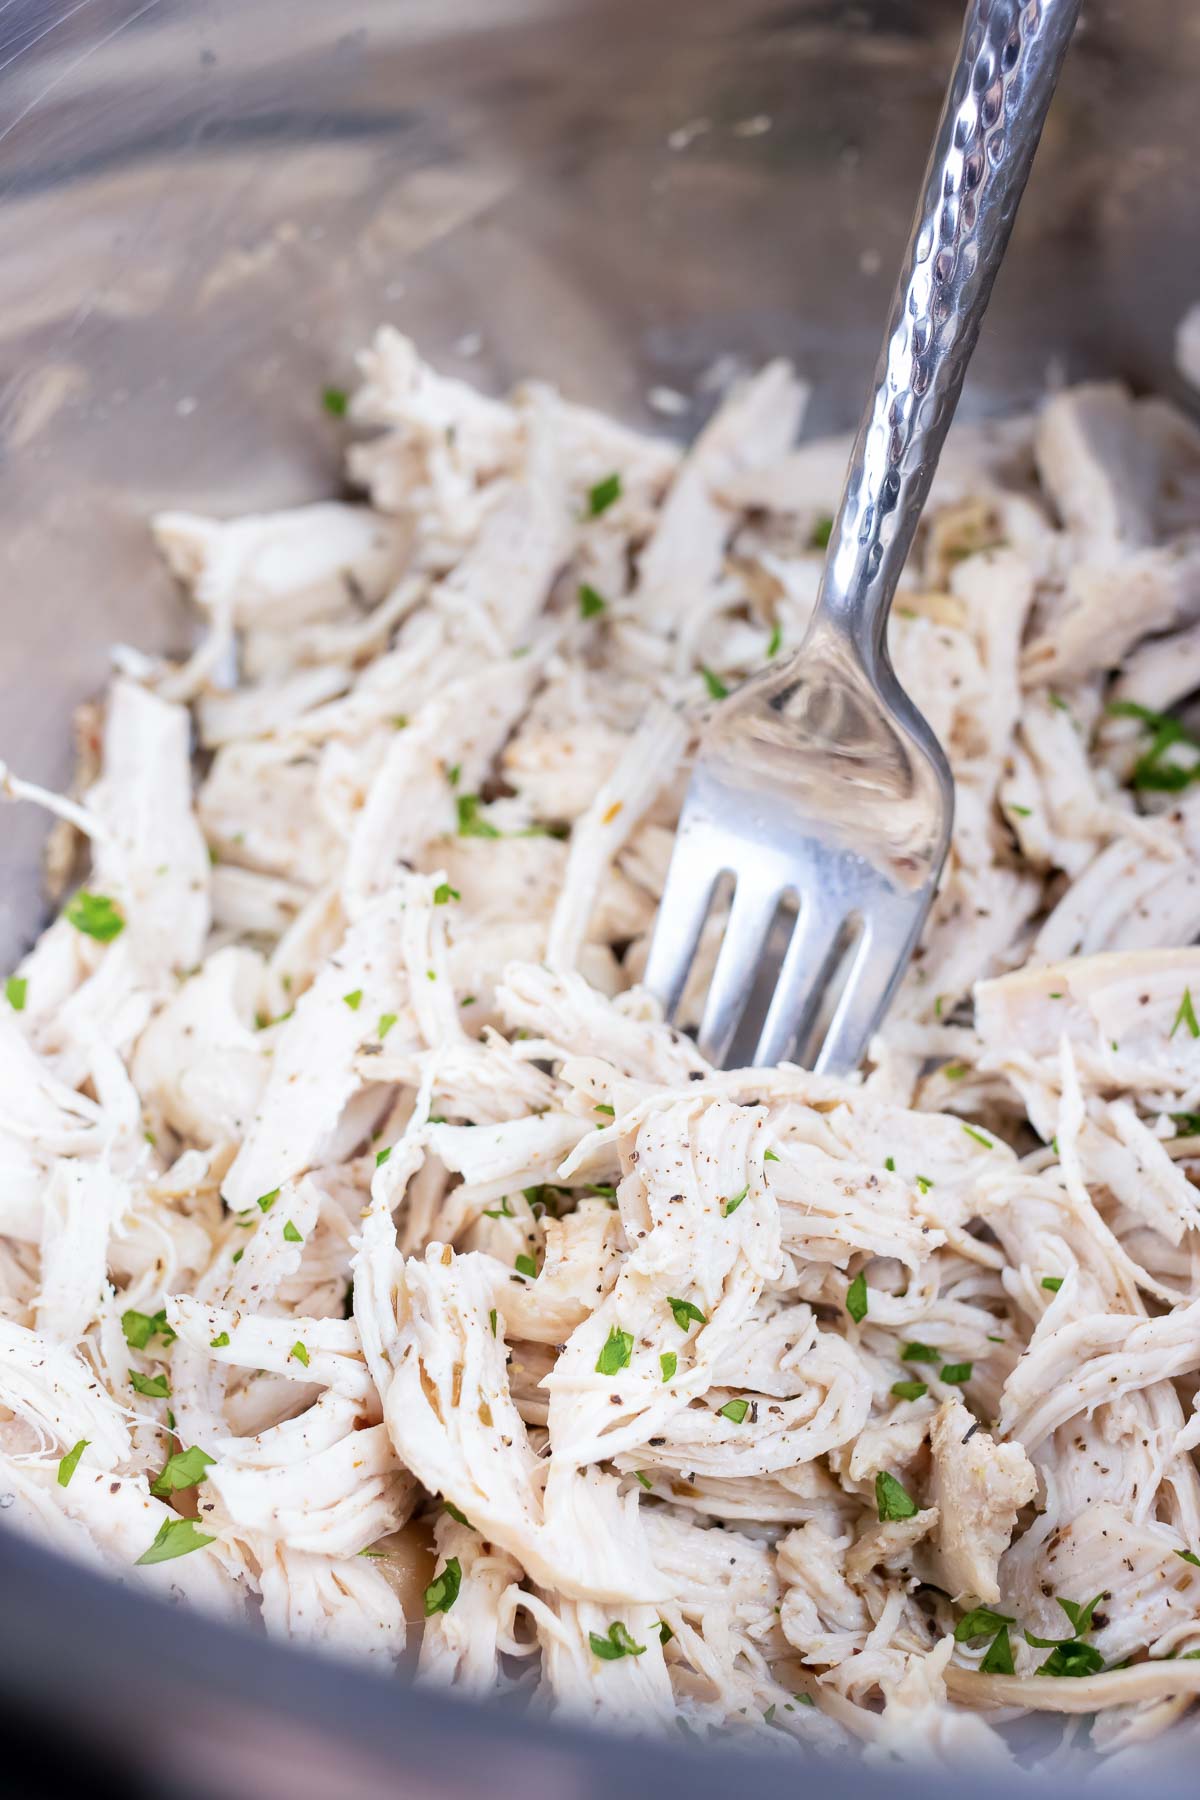 A stainless steel pot that is full of pulled chicken that has been pressure cooked.